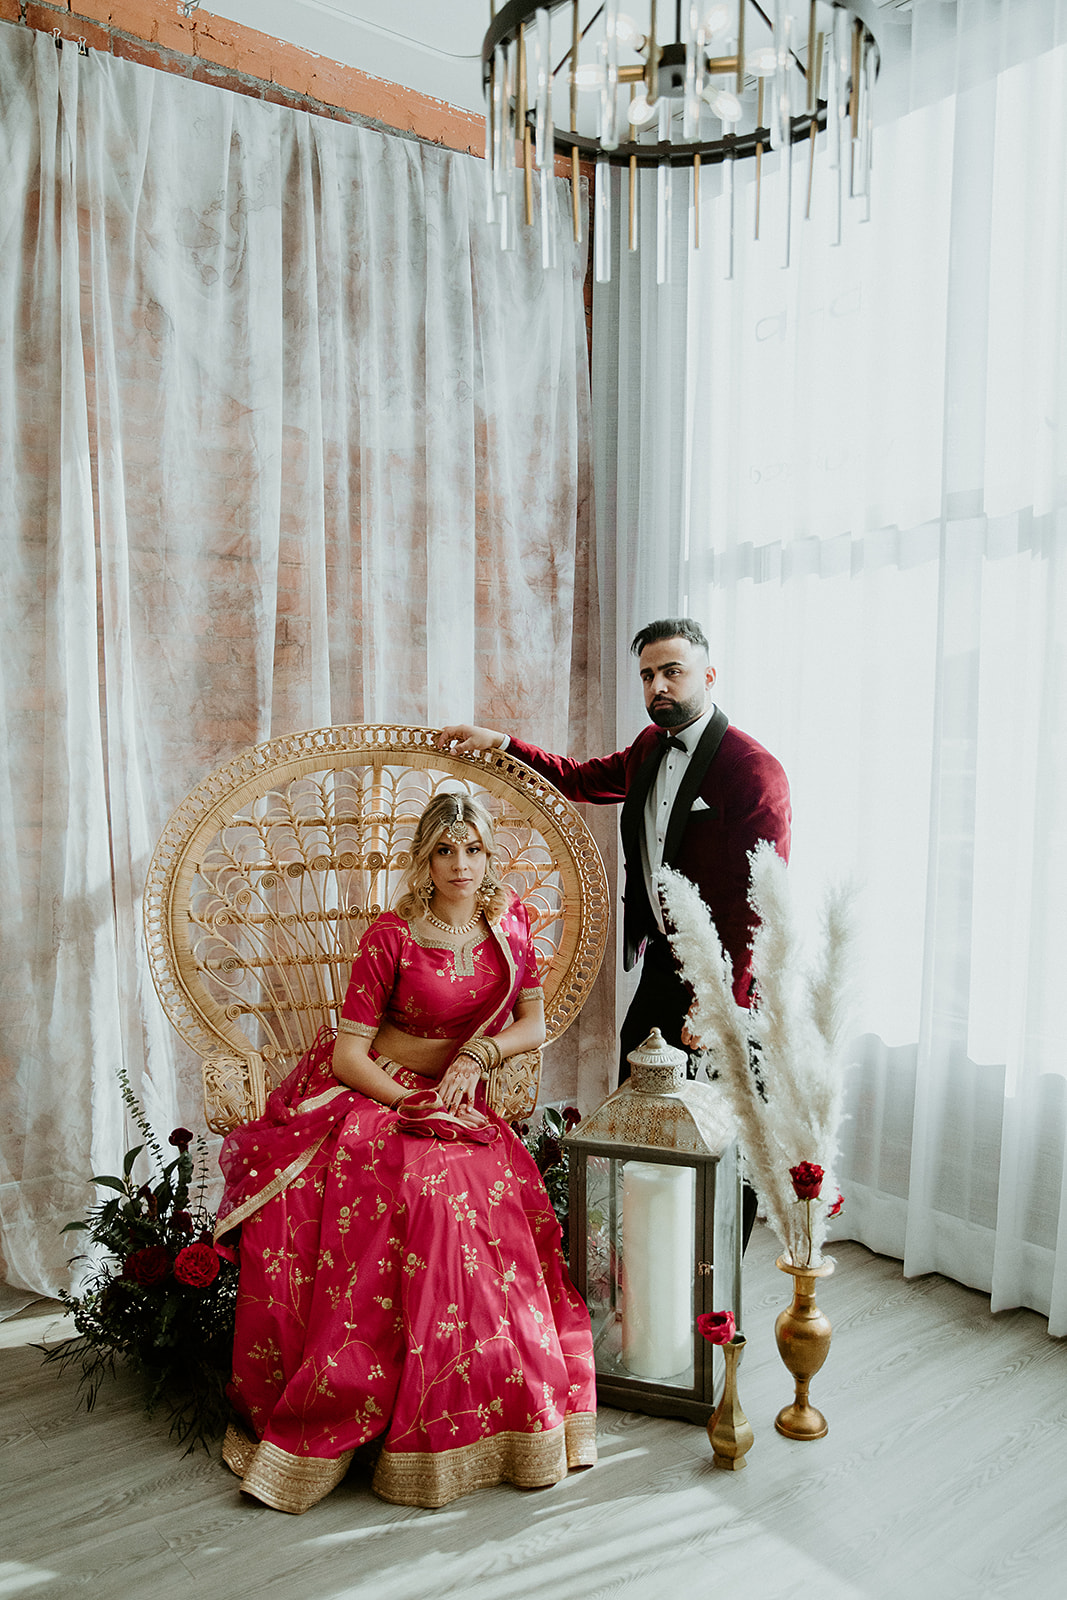 Multicultural bride and groom pose amongst wedding decor featuring wild pampas grass, antique gold details, and a rattan chair for their Indian meets Moroccan styling wedding